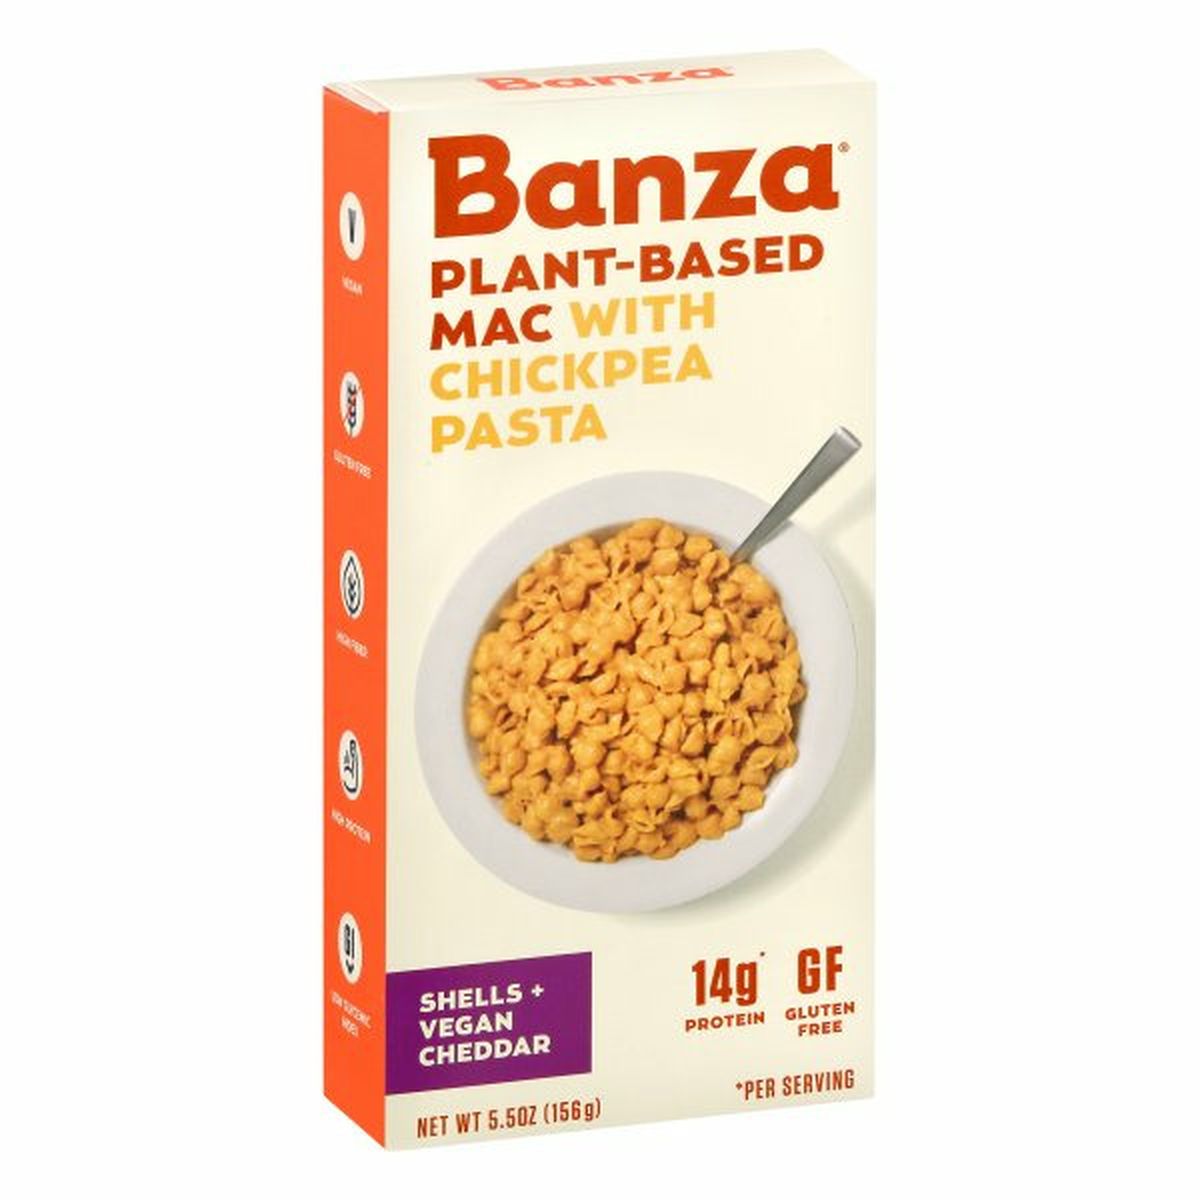 Calories in Banza Mac with Chickpea Pasta, Shells + Vegan Cheddar, Plant-Based